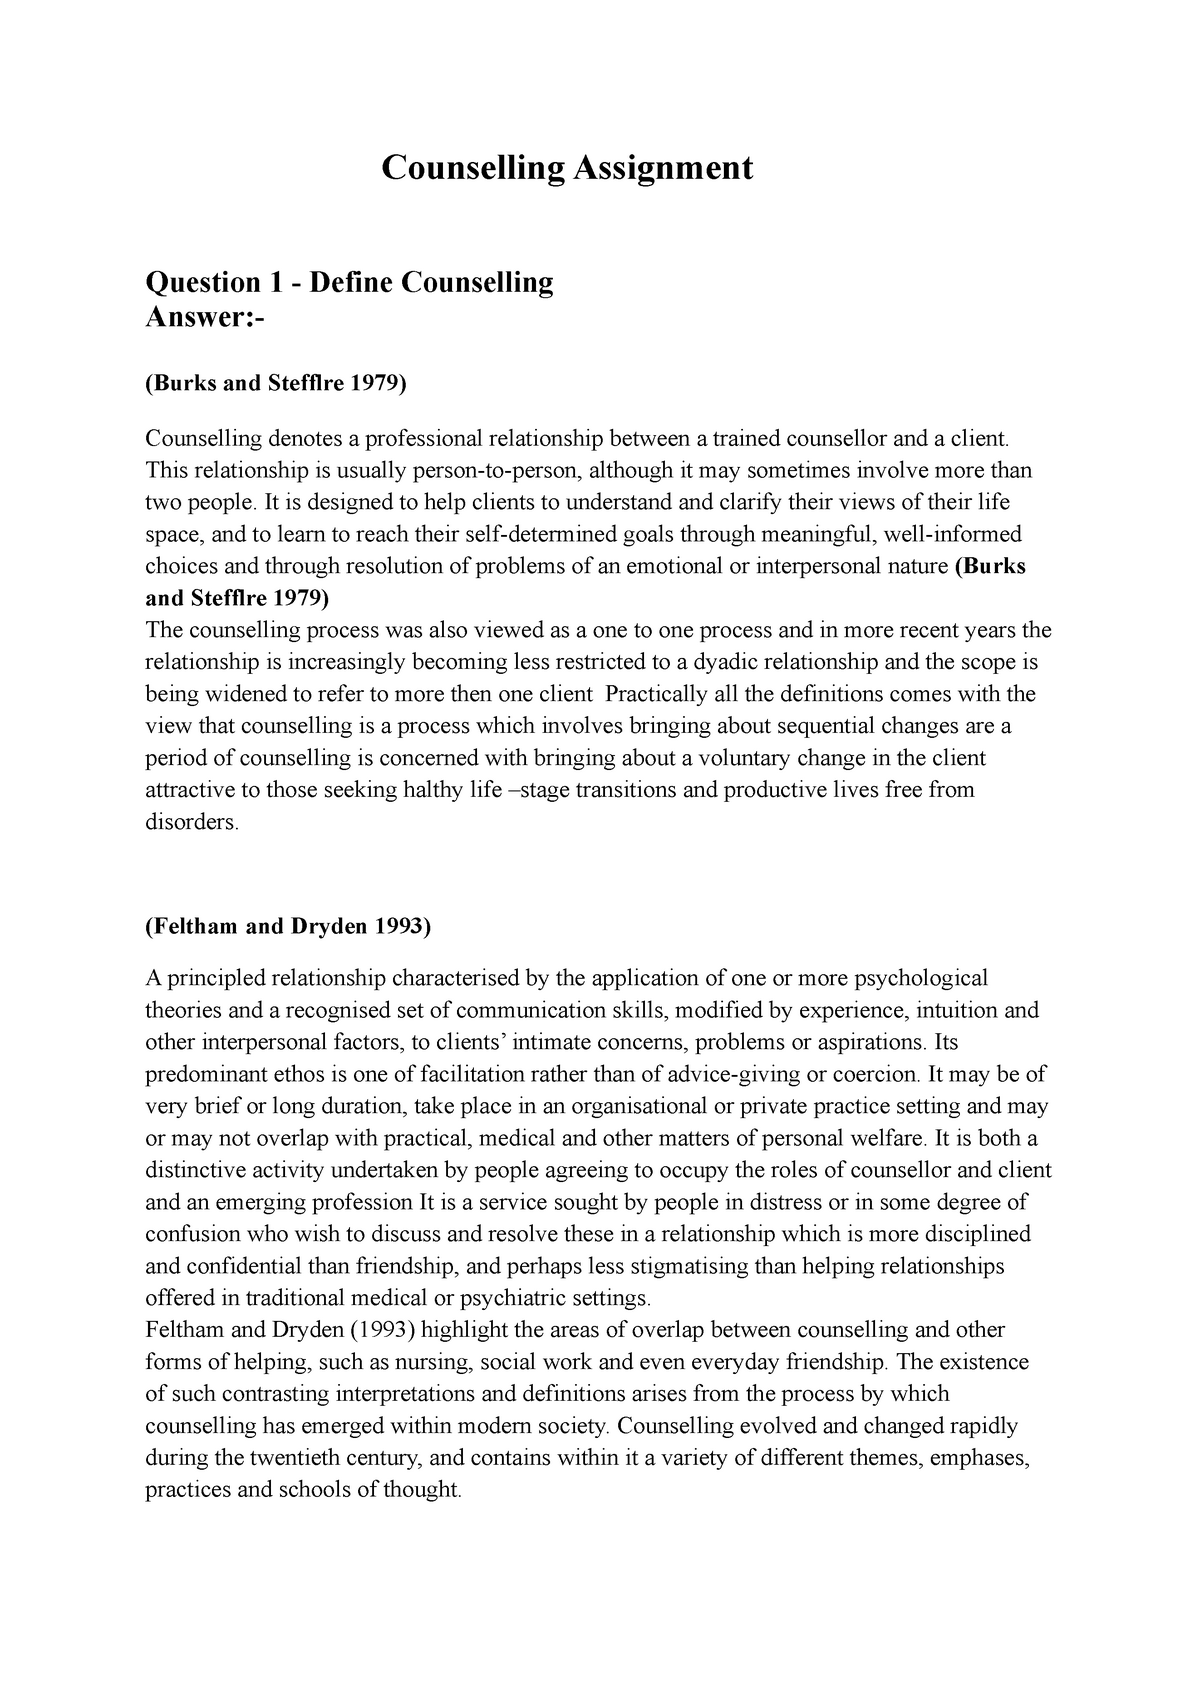 counselling case study assignment